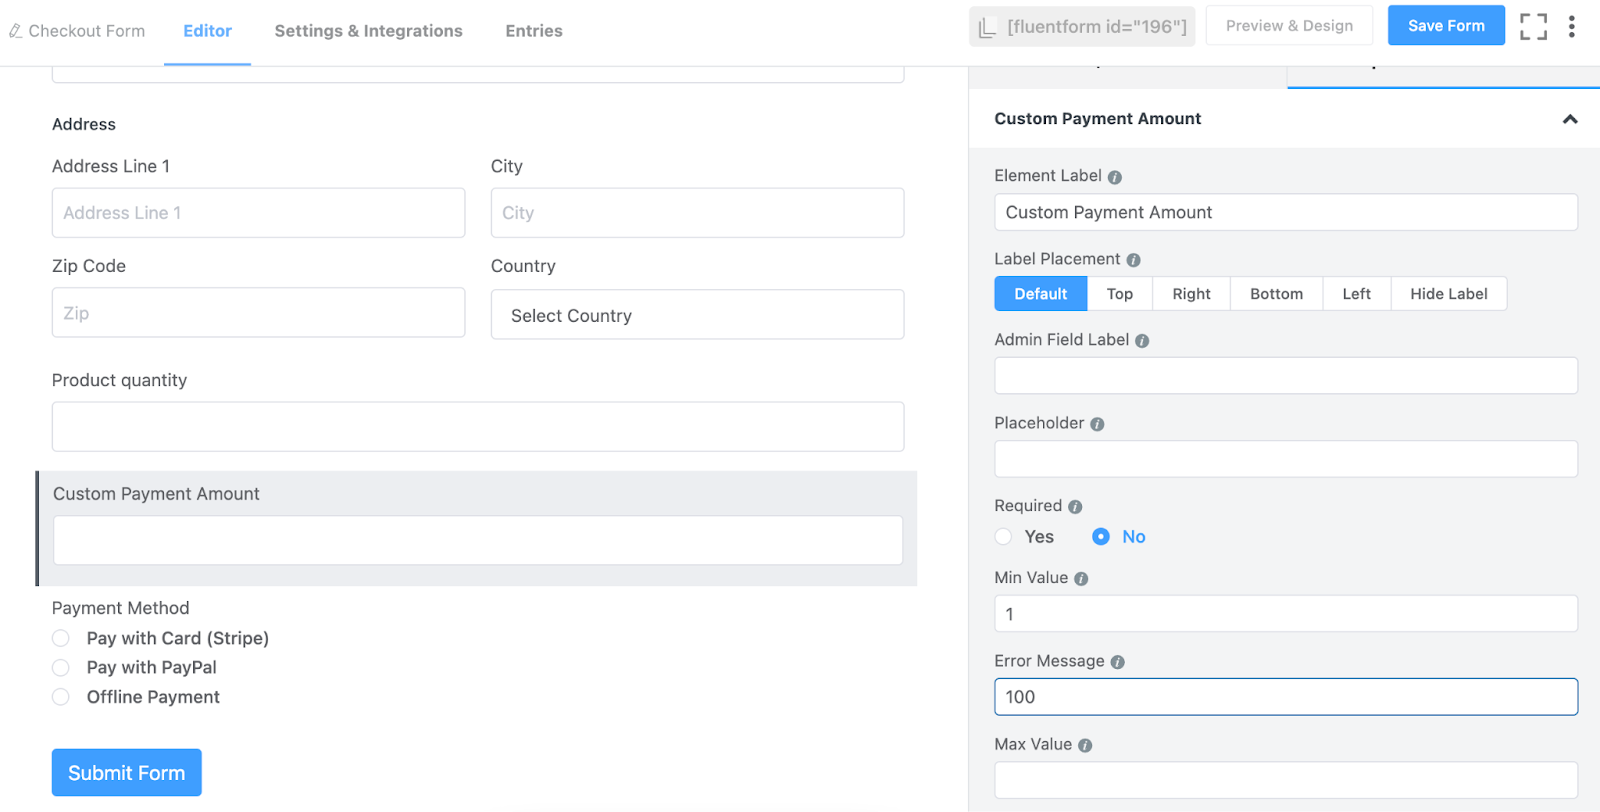 Fluent Forms' custom payment amount field, editor